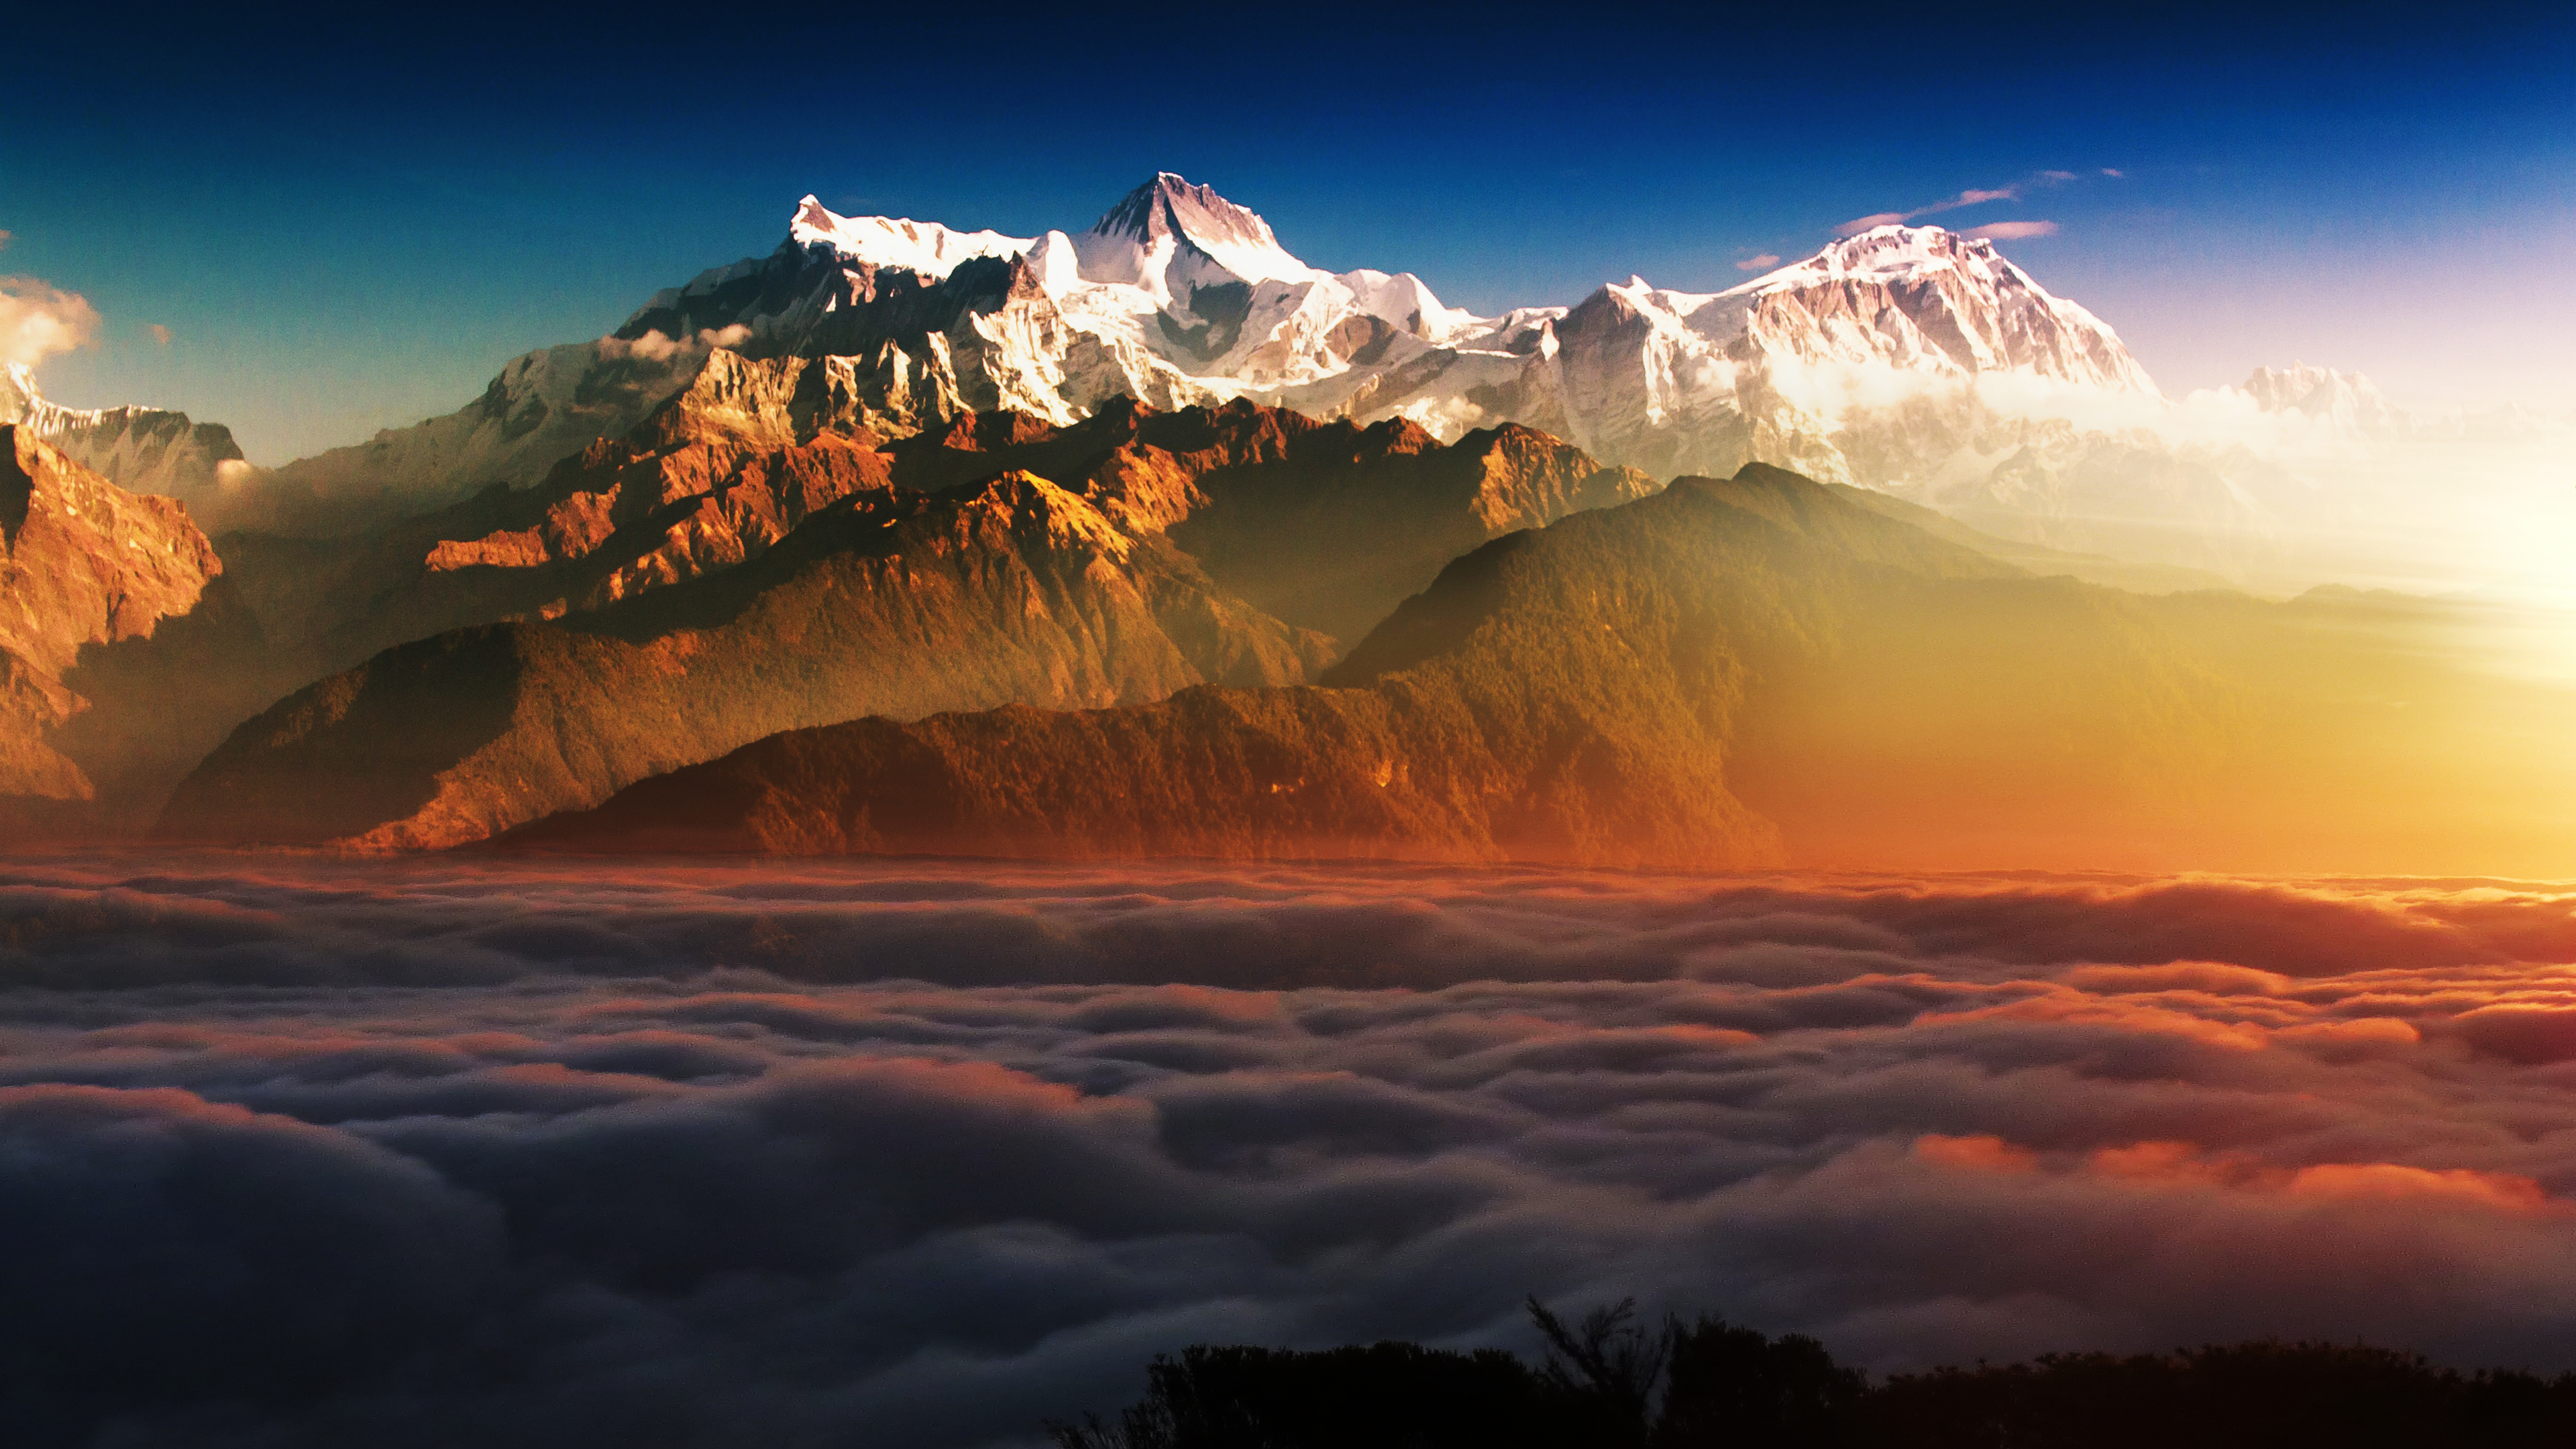  3840x2160  Mountains In Clouds 4K Wallpaper  HD Nature 4K 